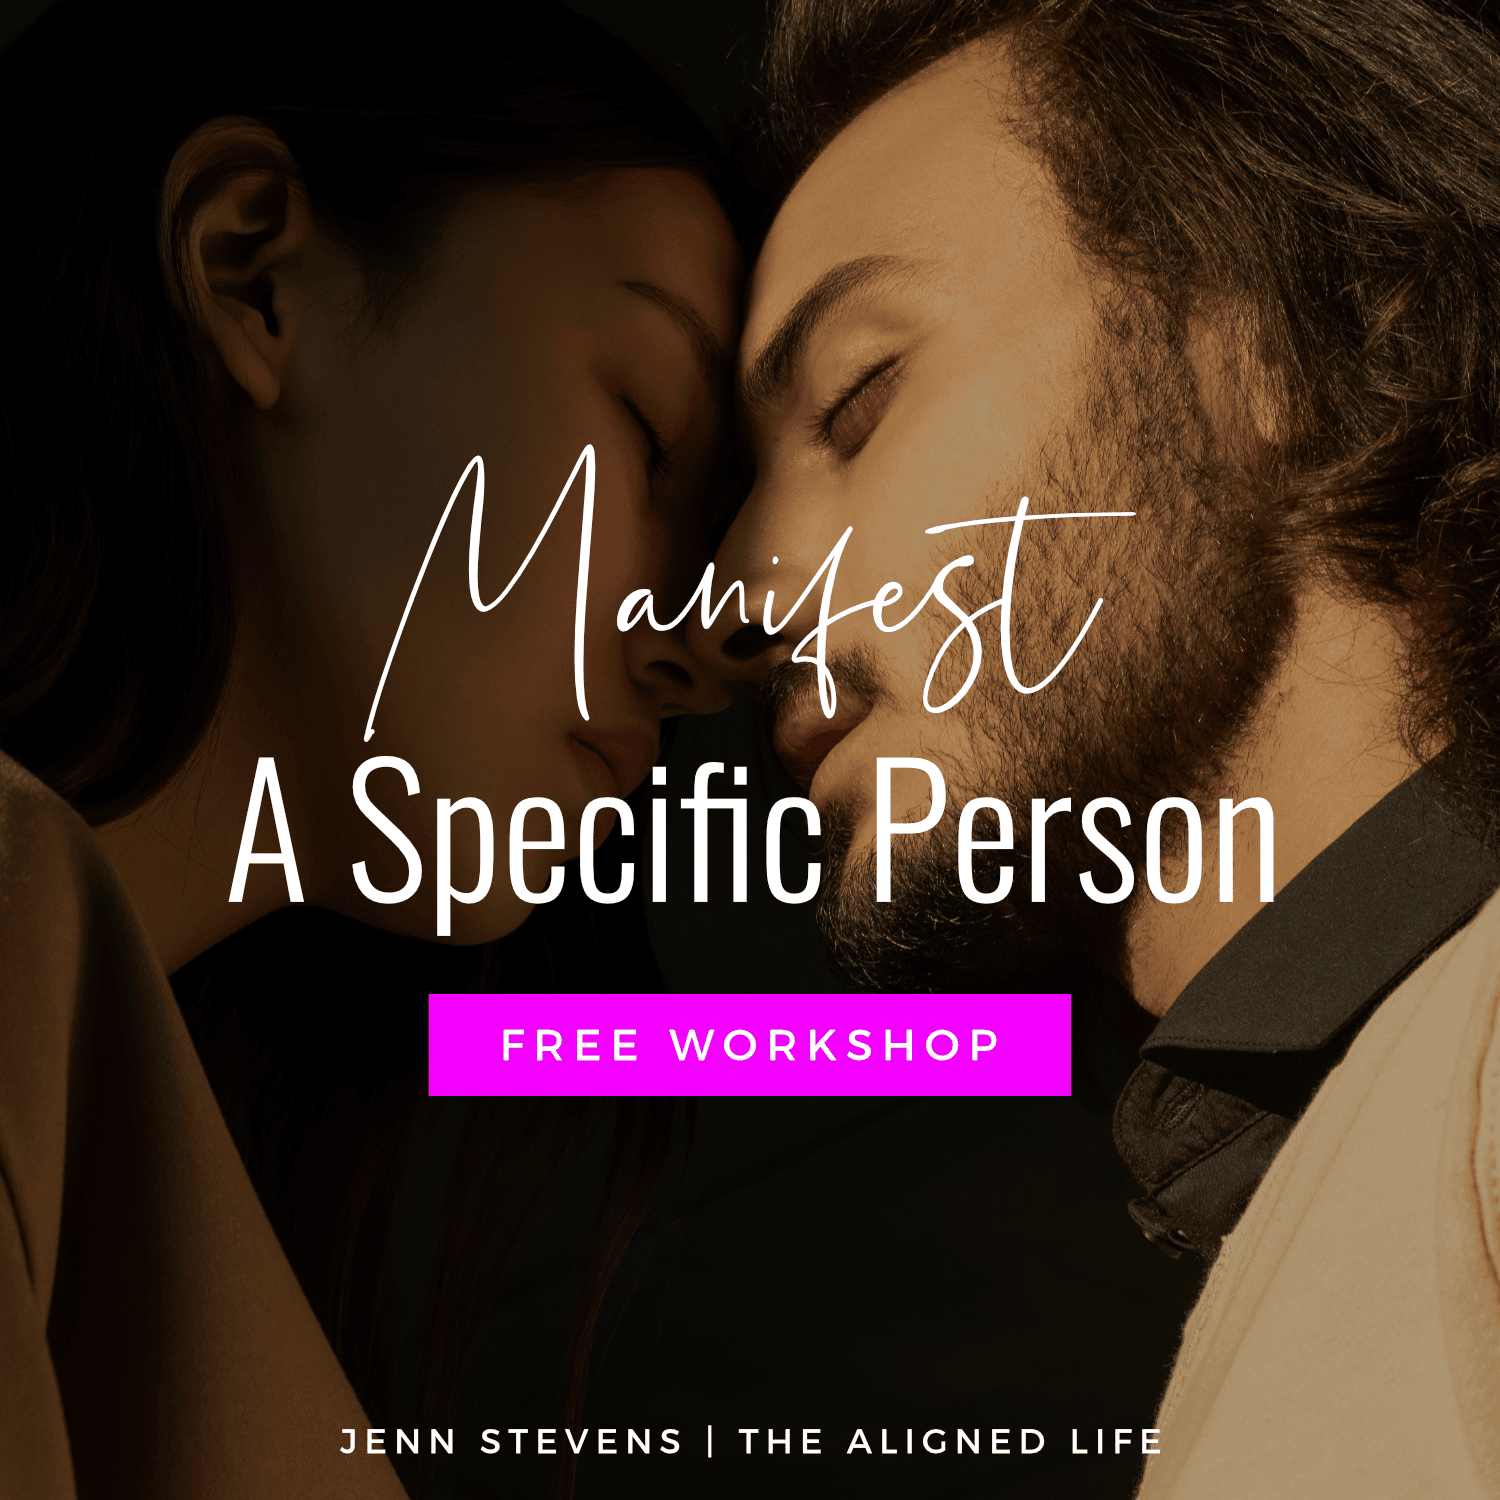 How To Manifest A Specific Person FREE Workshop